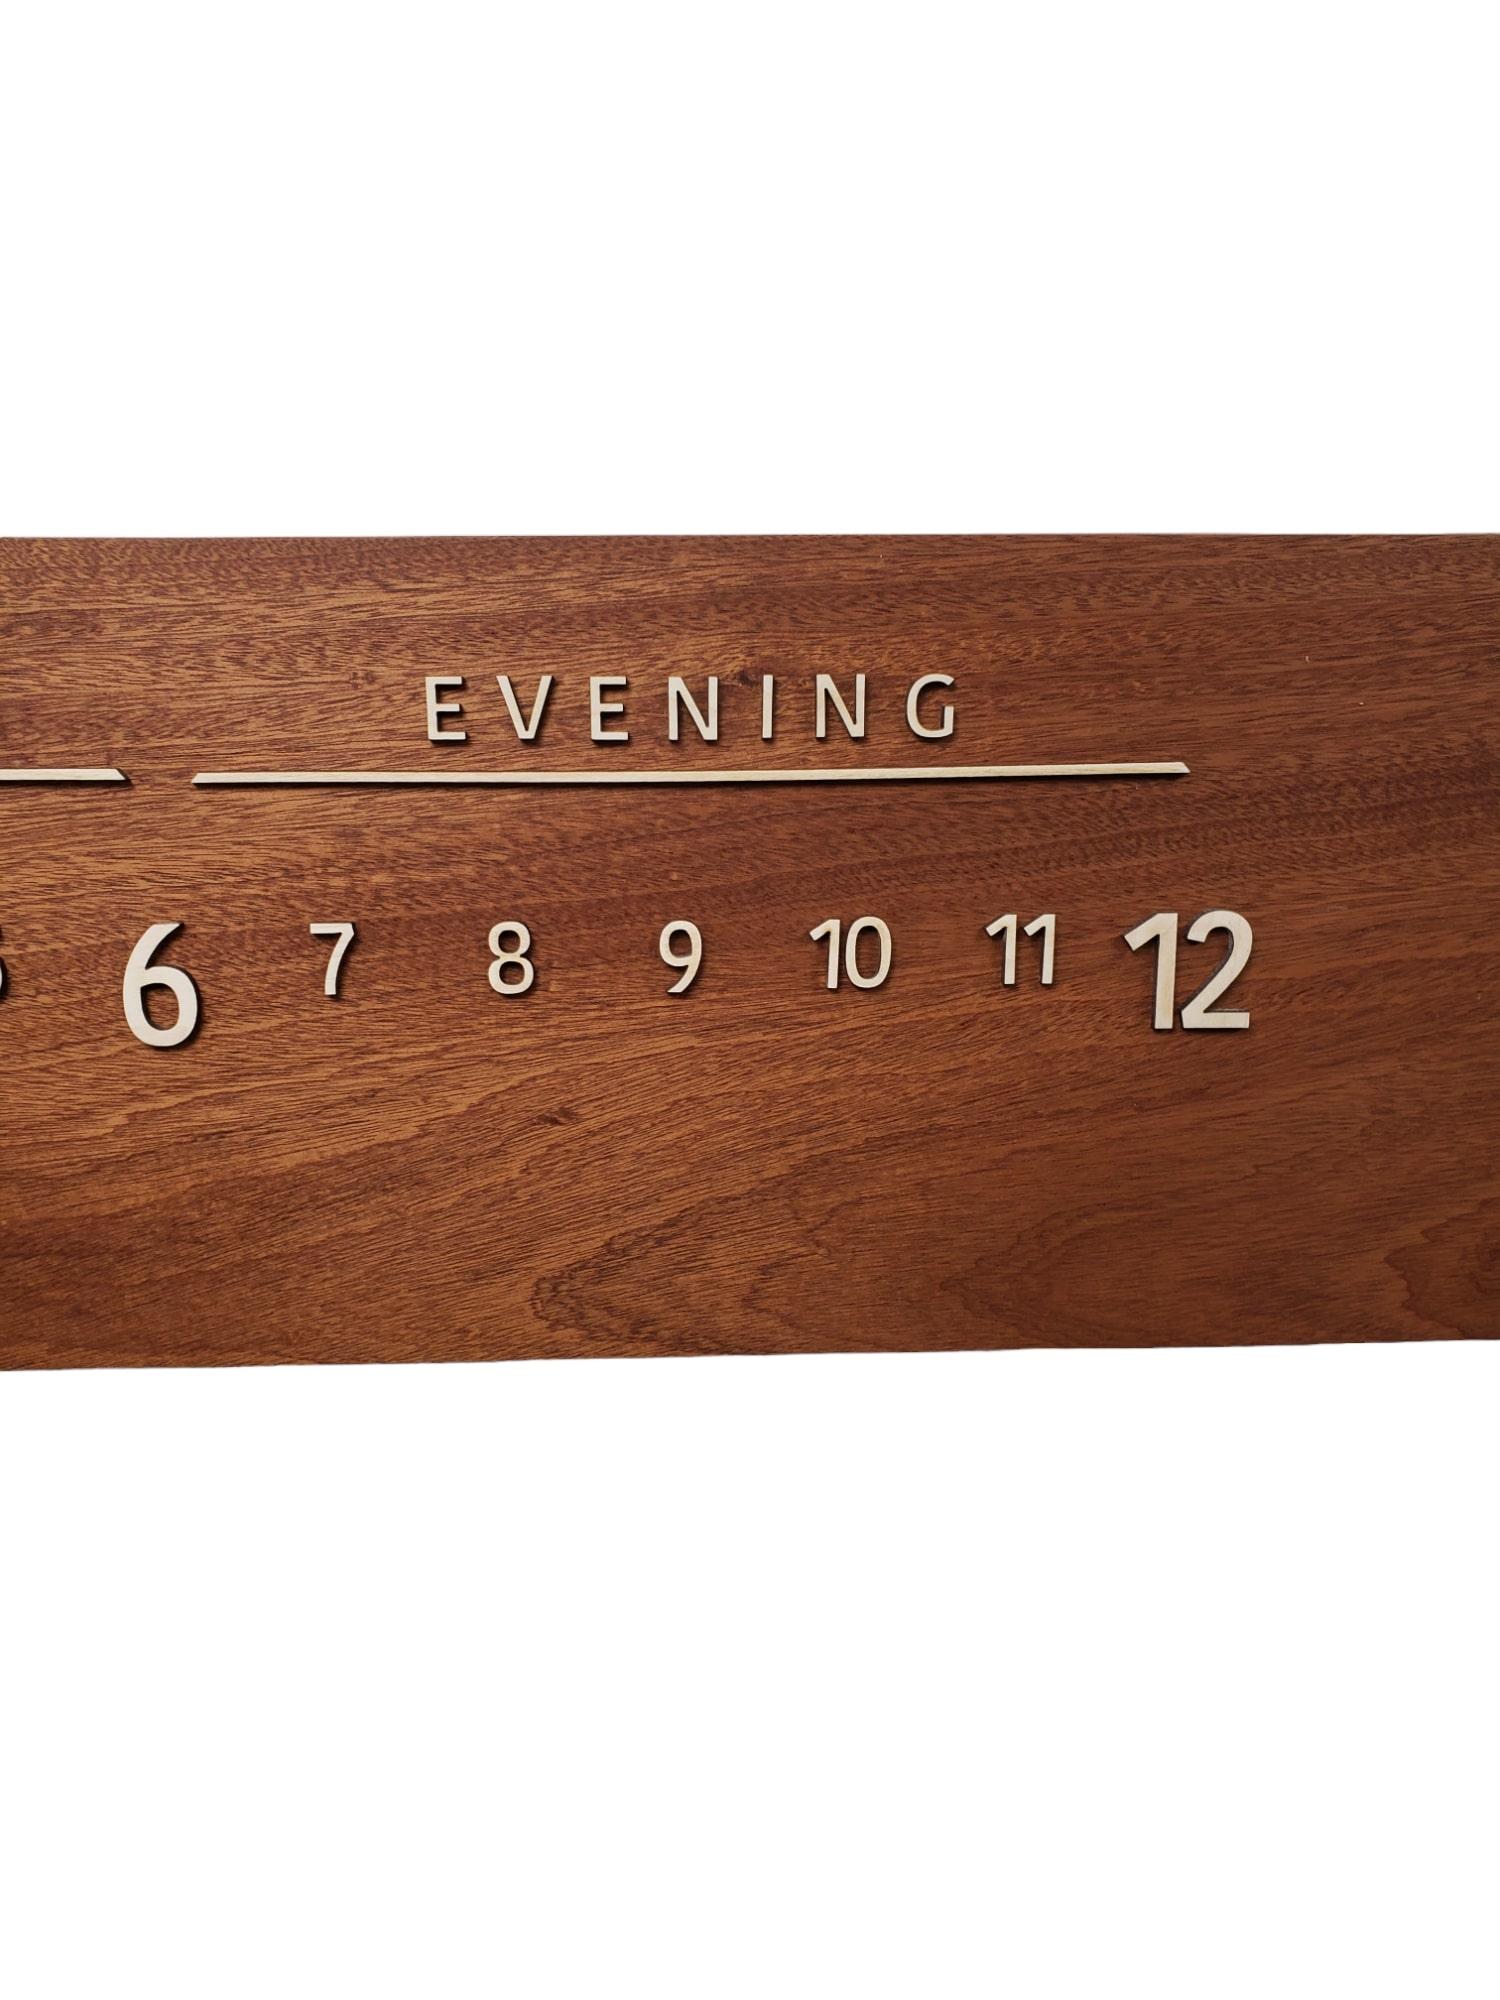 Contemporary Vesuvius: 3-foot Sabele and Maple Linear Clock